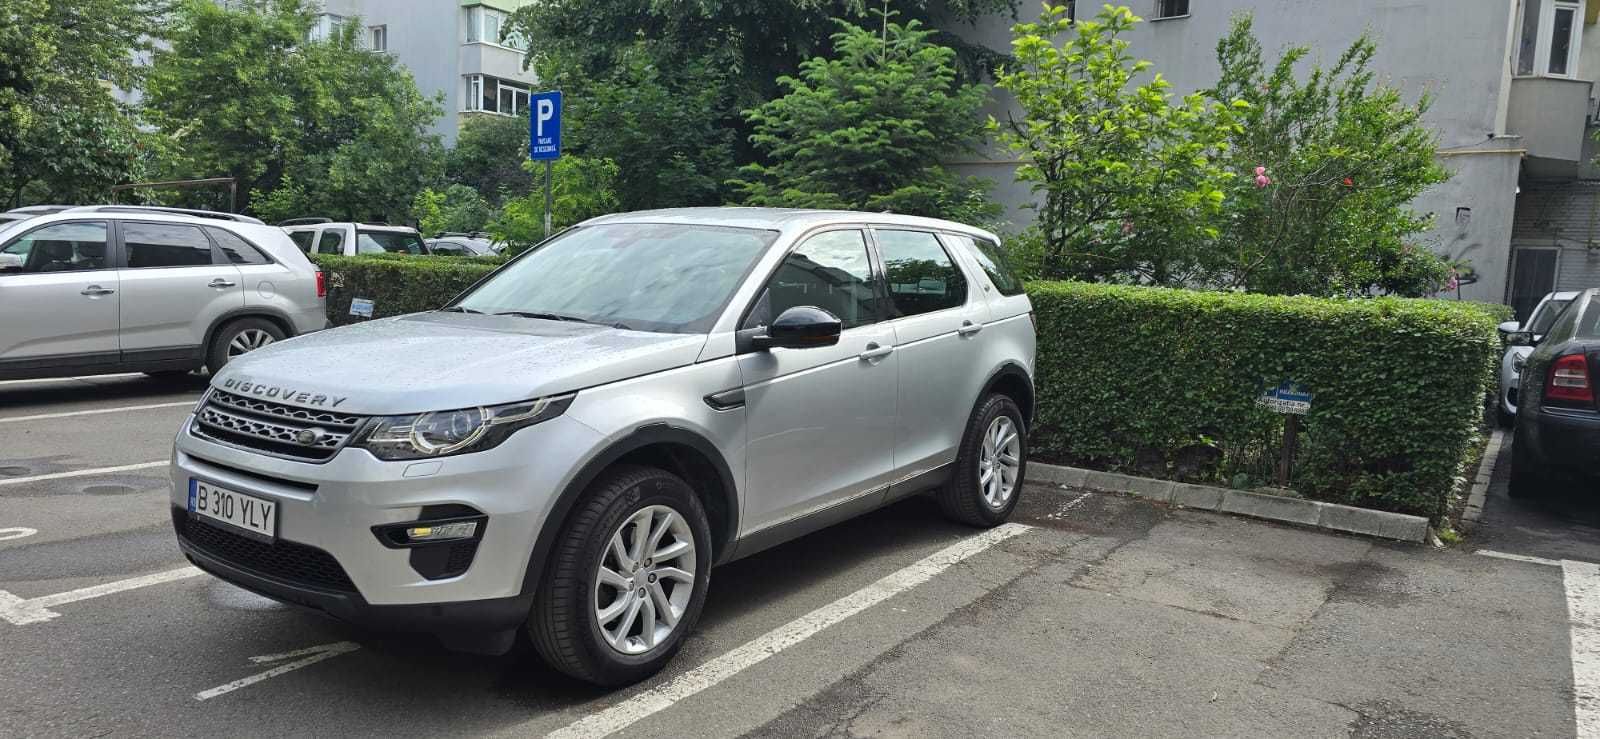 Vand Land Rover Discovery Sport, SUV, 2.0 l TD4 110KW/150 CP, PURE